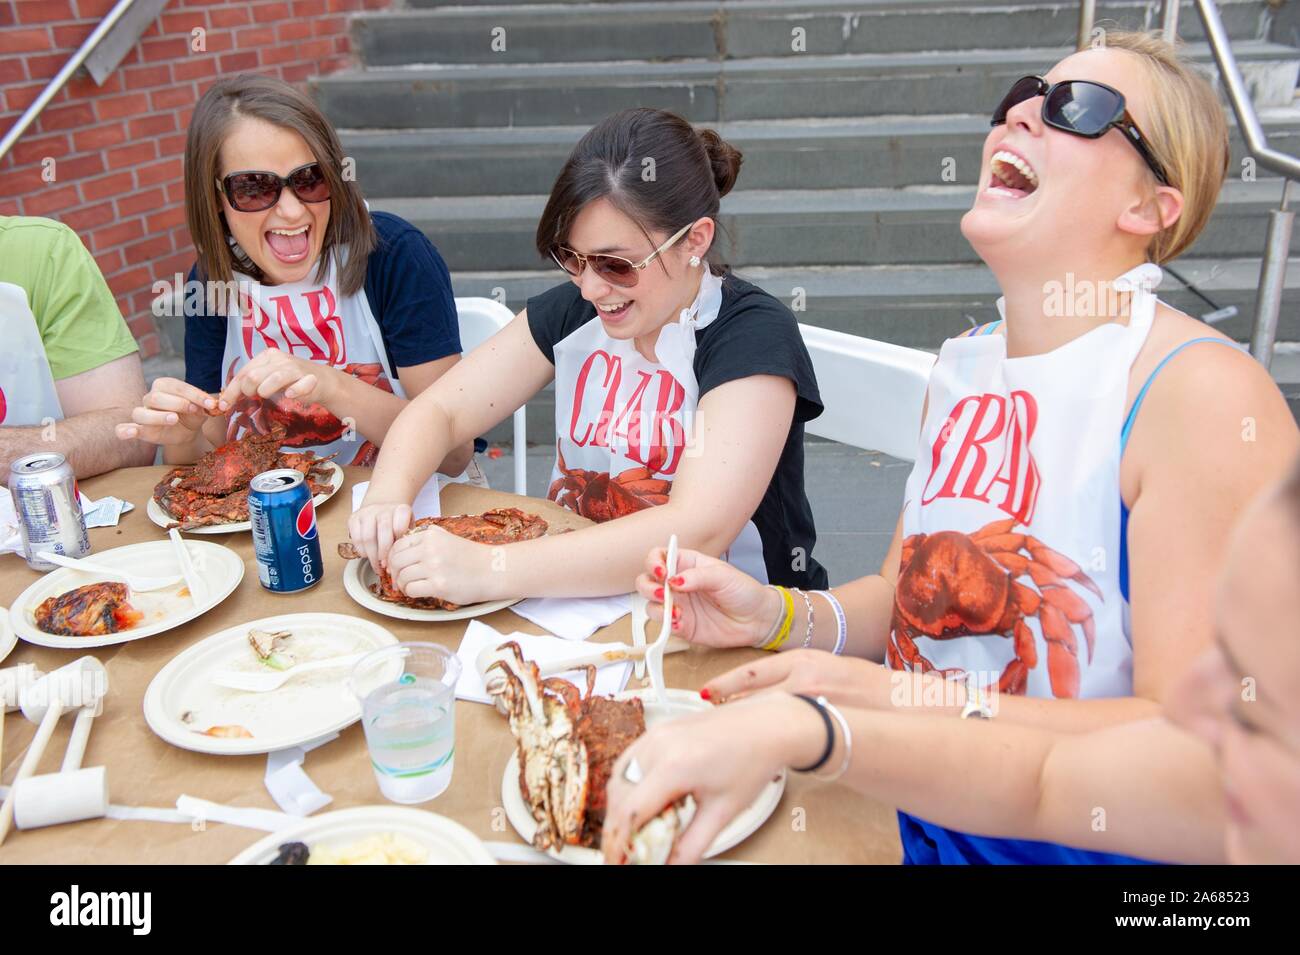 Students participate in a crab feast with the traditional Maryland dish of blue crabs, on the Homewood Campus of the Johns Hopkins University in Baltimore, Maryland, May 21, 2010. From the Homewood Photography collection. () Stock Photo